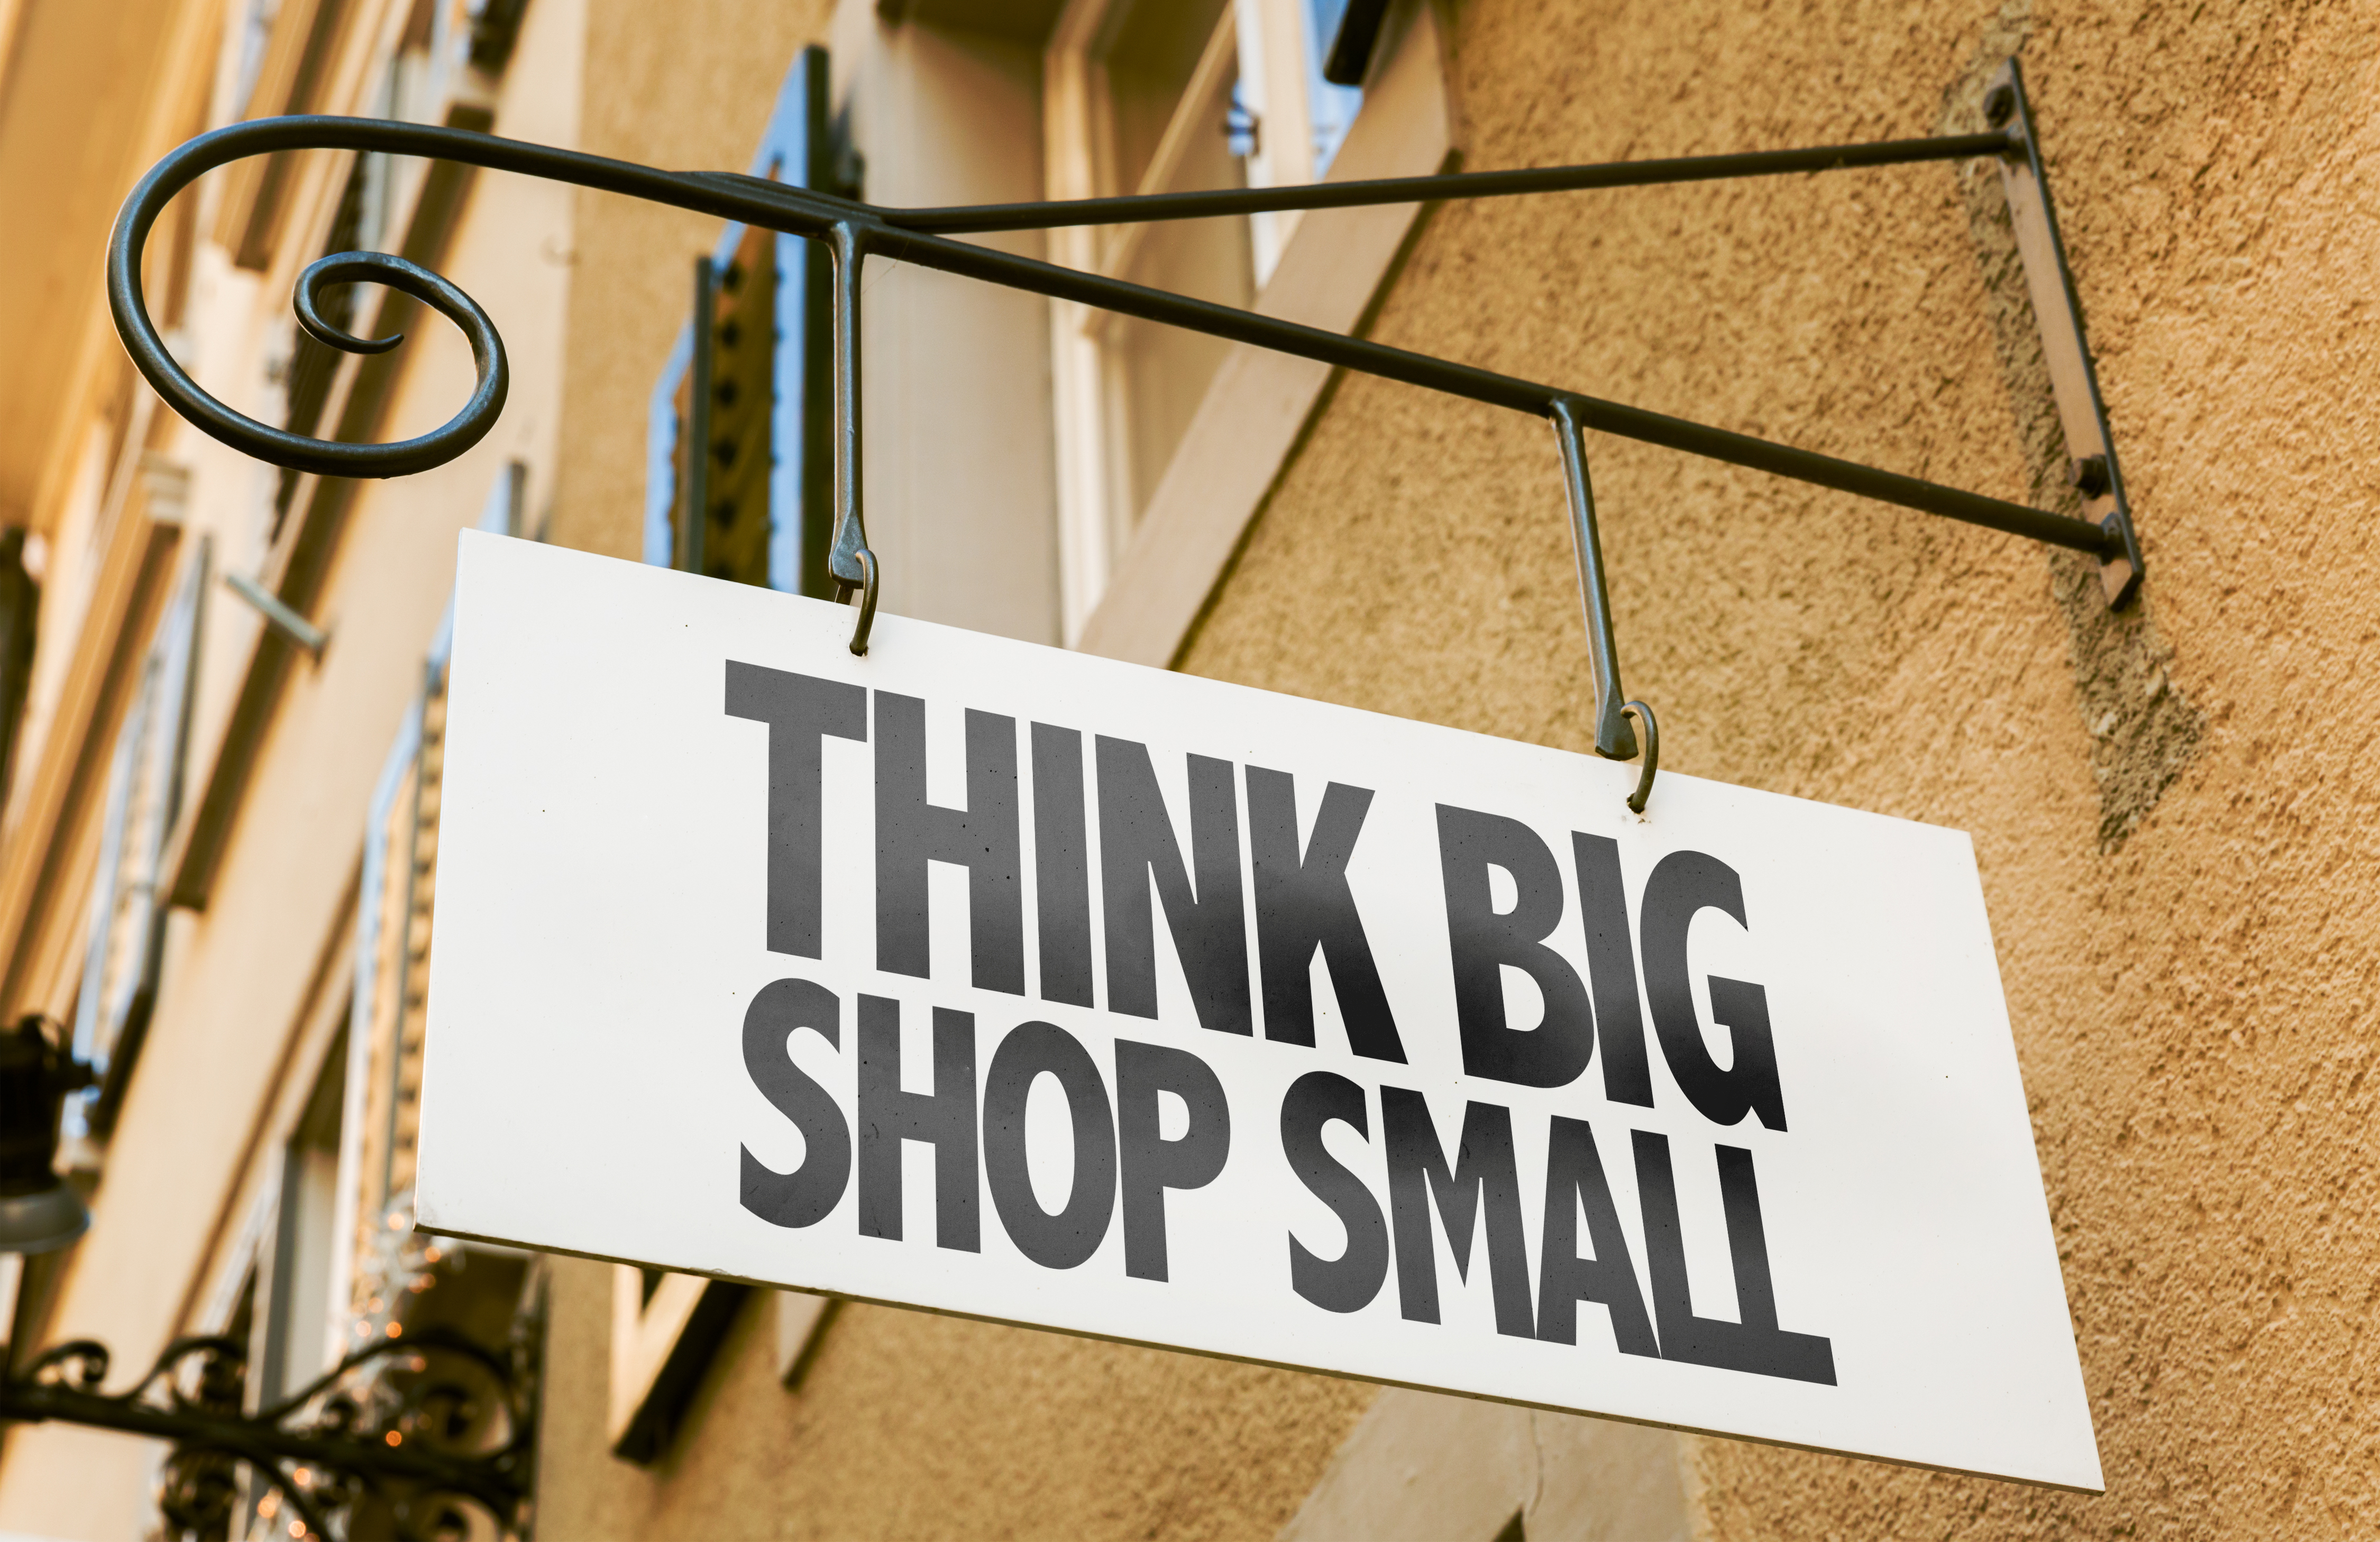 Think Big Shop Small sign in a conceptual image [Shutterstock/ESB Professional]